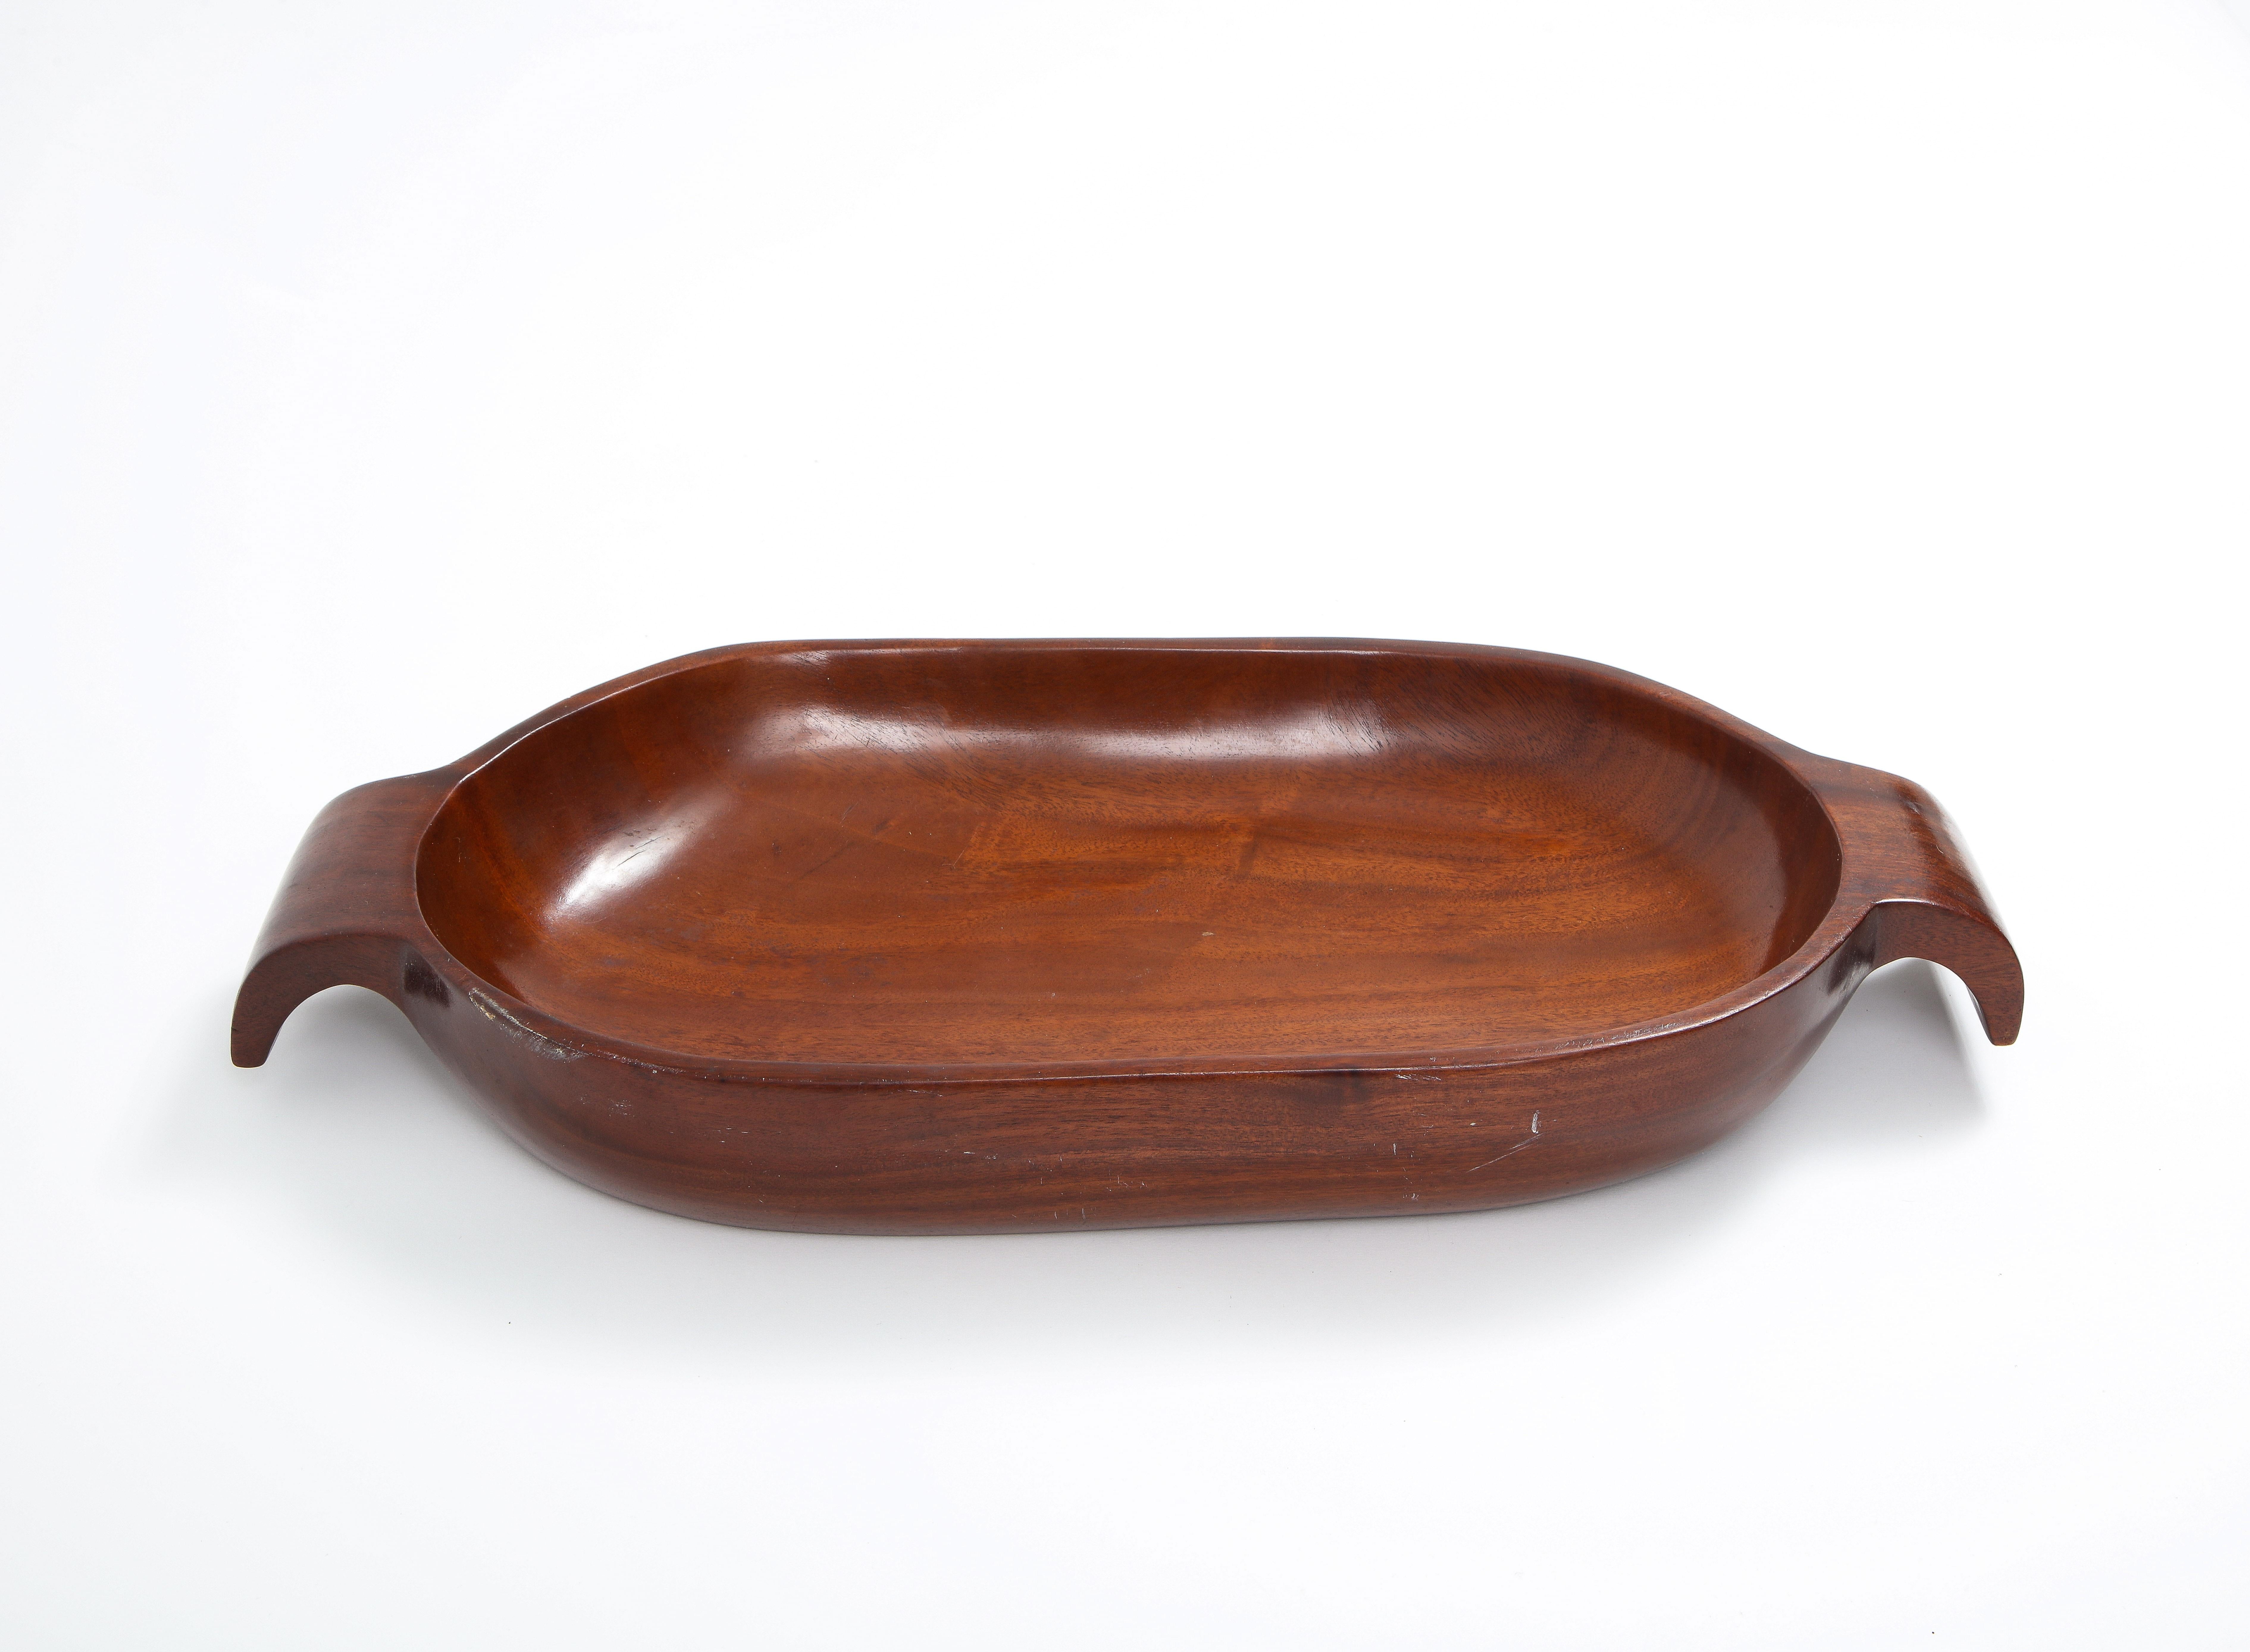 Solid carved Santo Domingo Mahogany tray with handles. The tray has beautiful flowing lines and a great patina and natural polish.